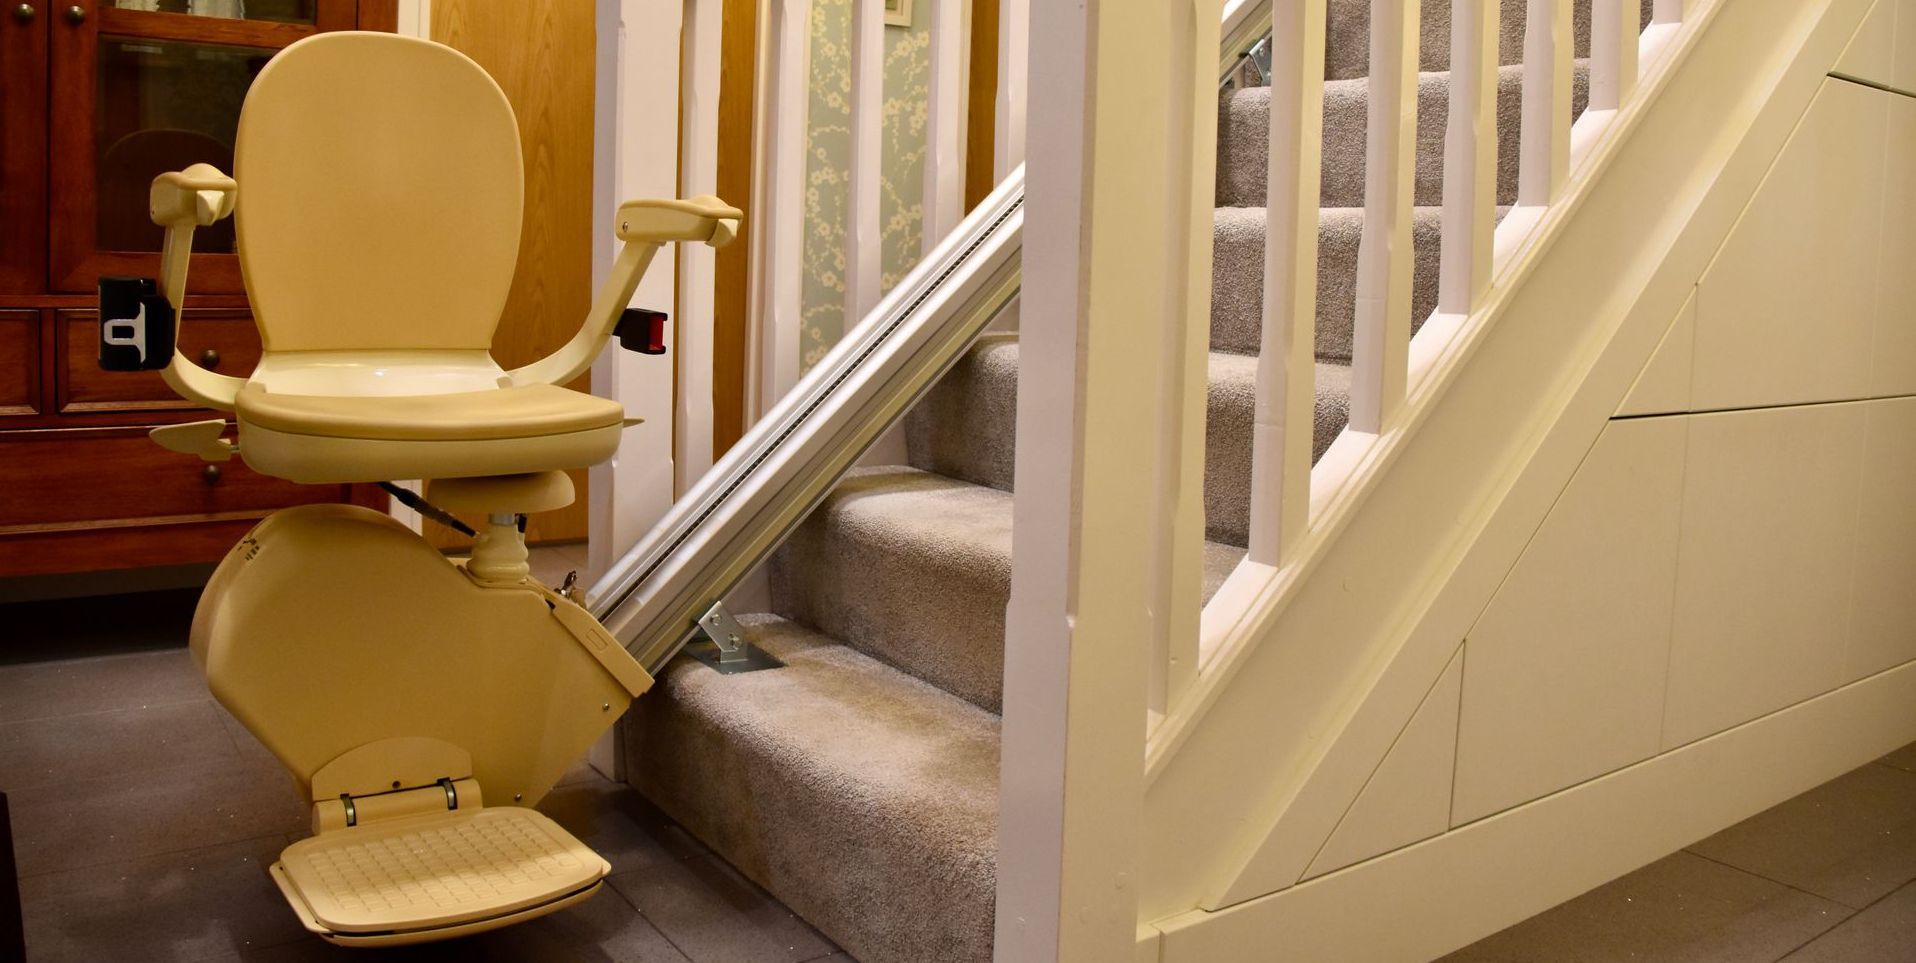 How much do chairlifts and stairlifts cost to fit?